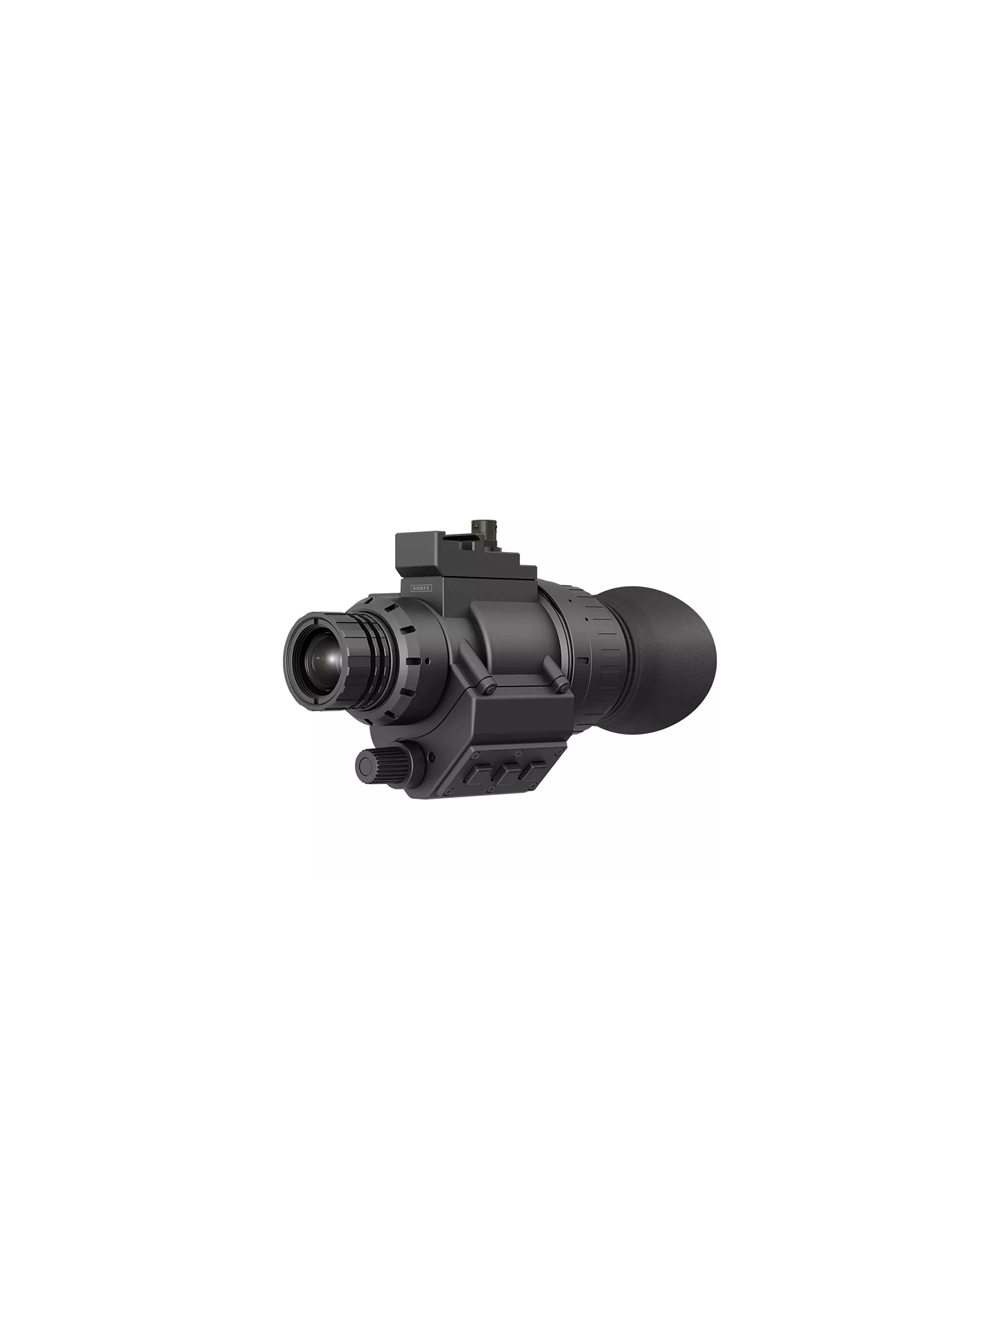 OPSIN Color Night Vision Monocular. - SIONYX